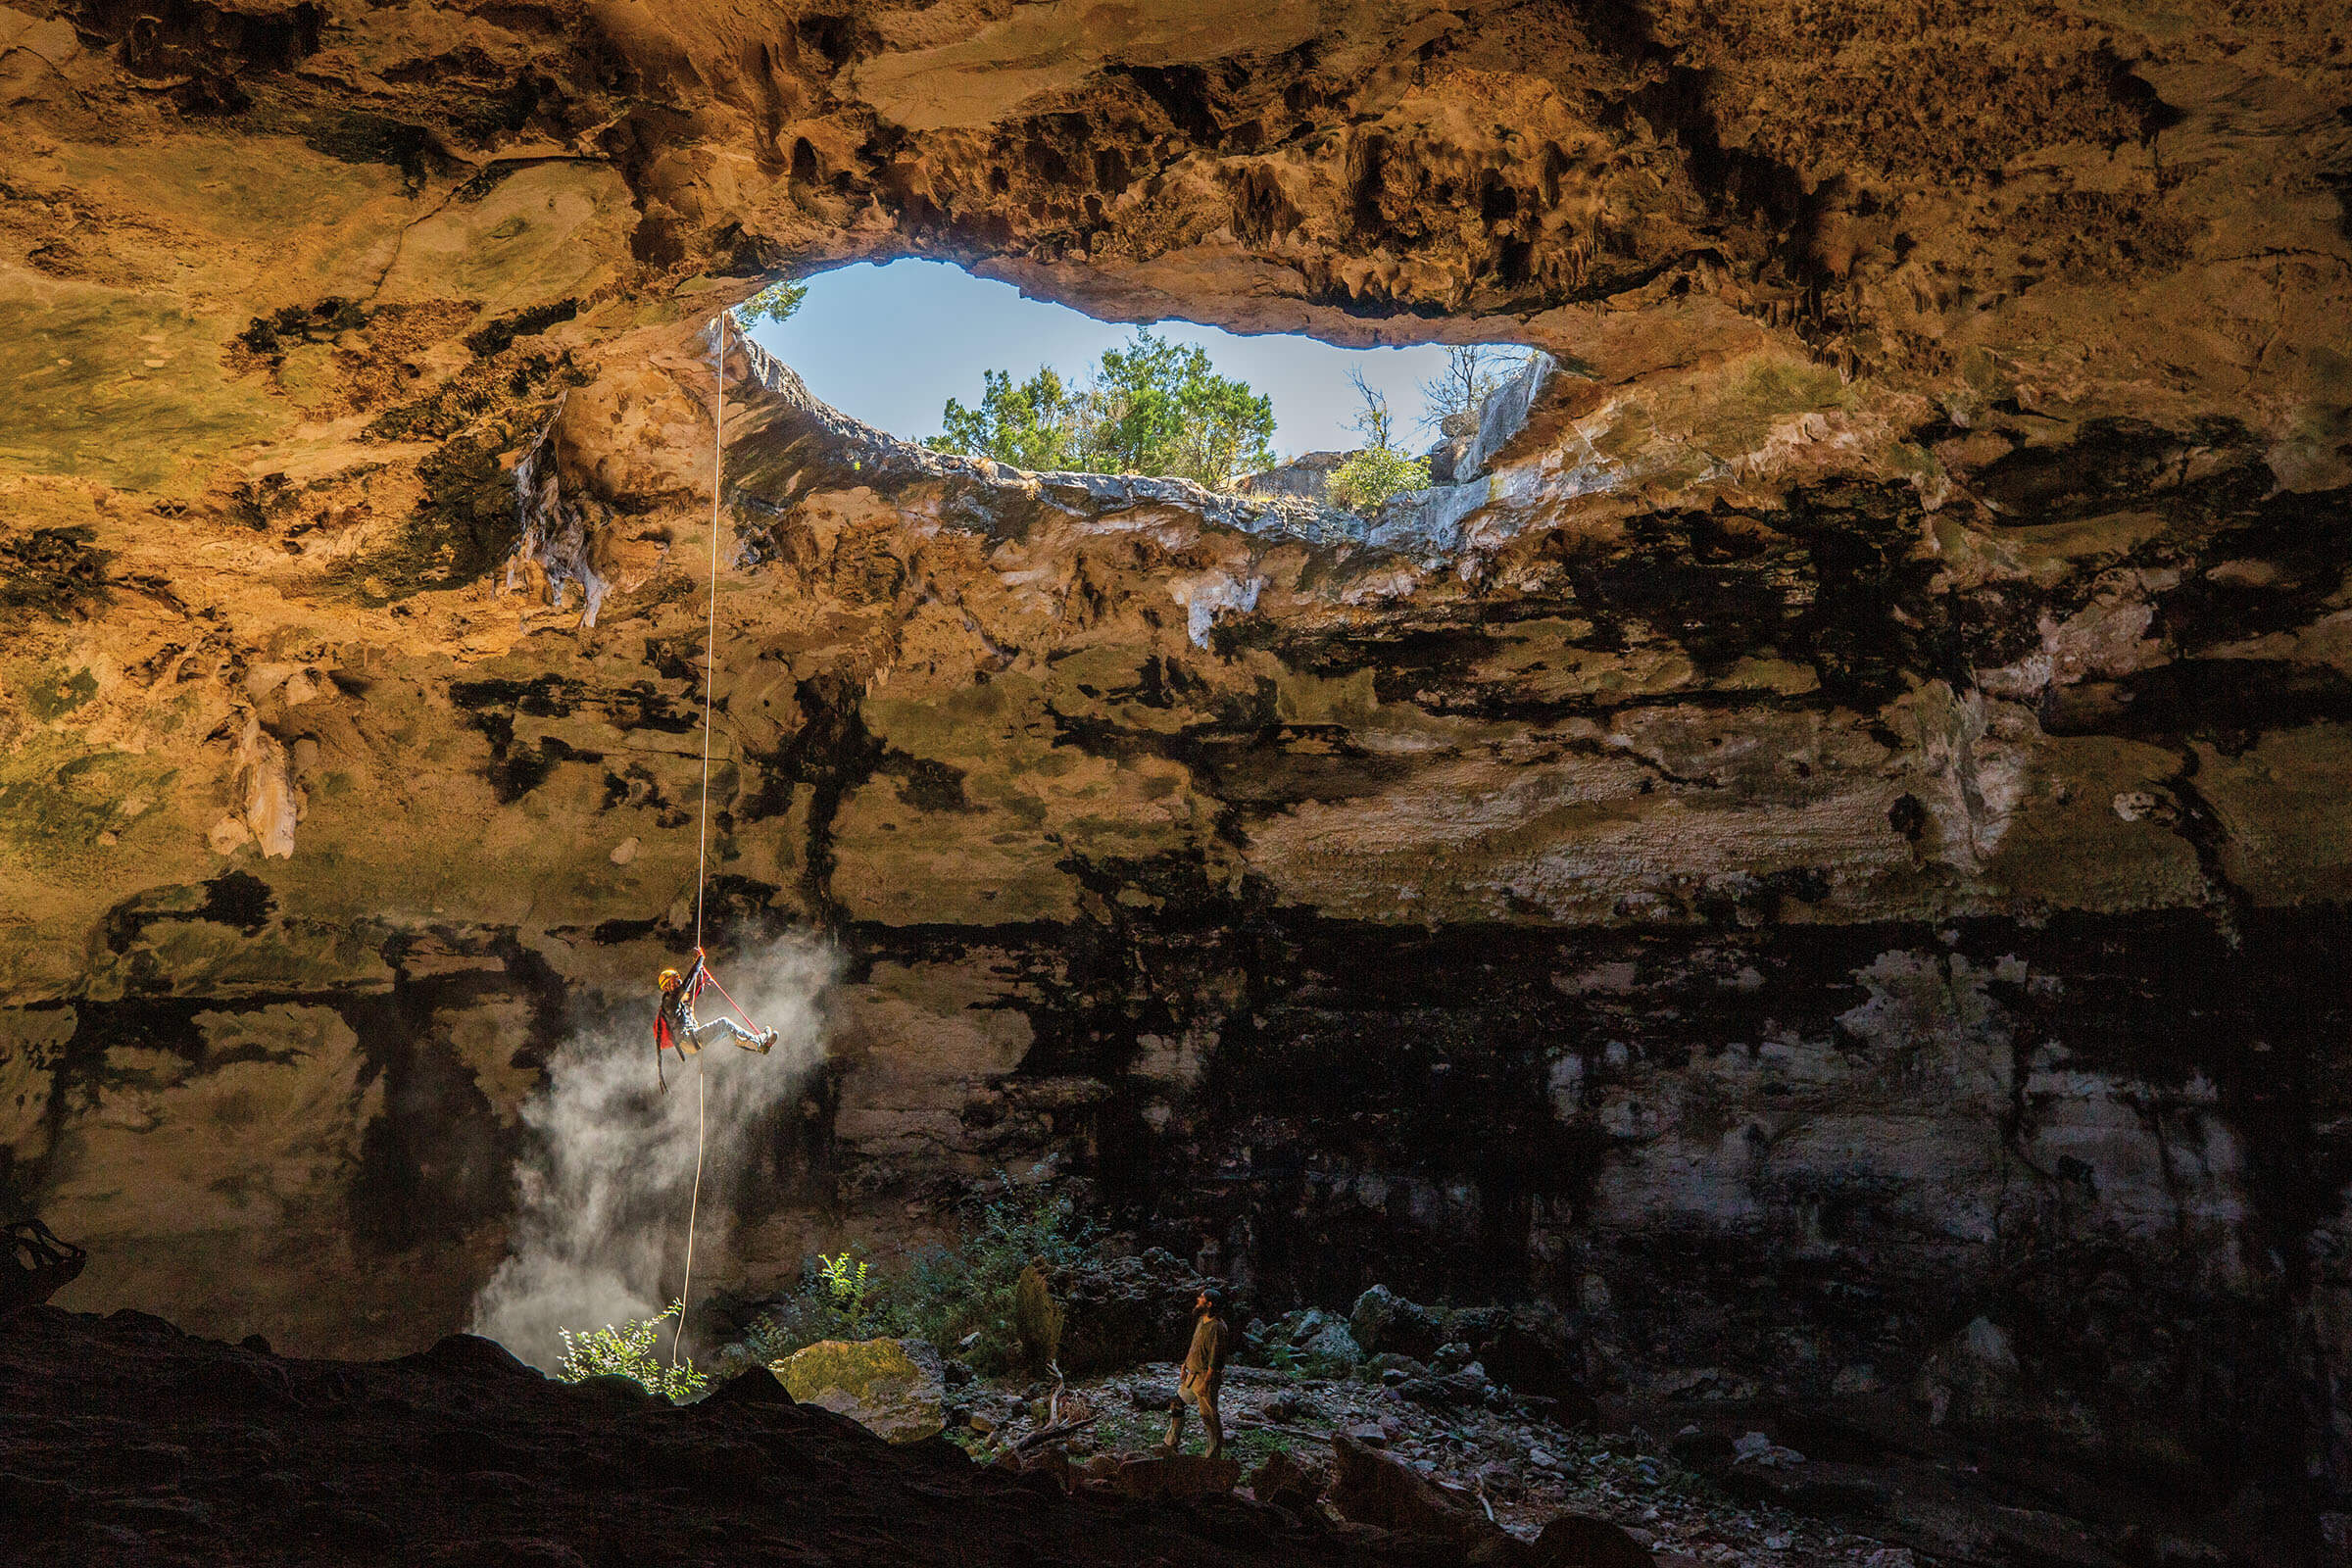 A caver ascends out of Punkin Cave